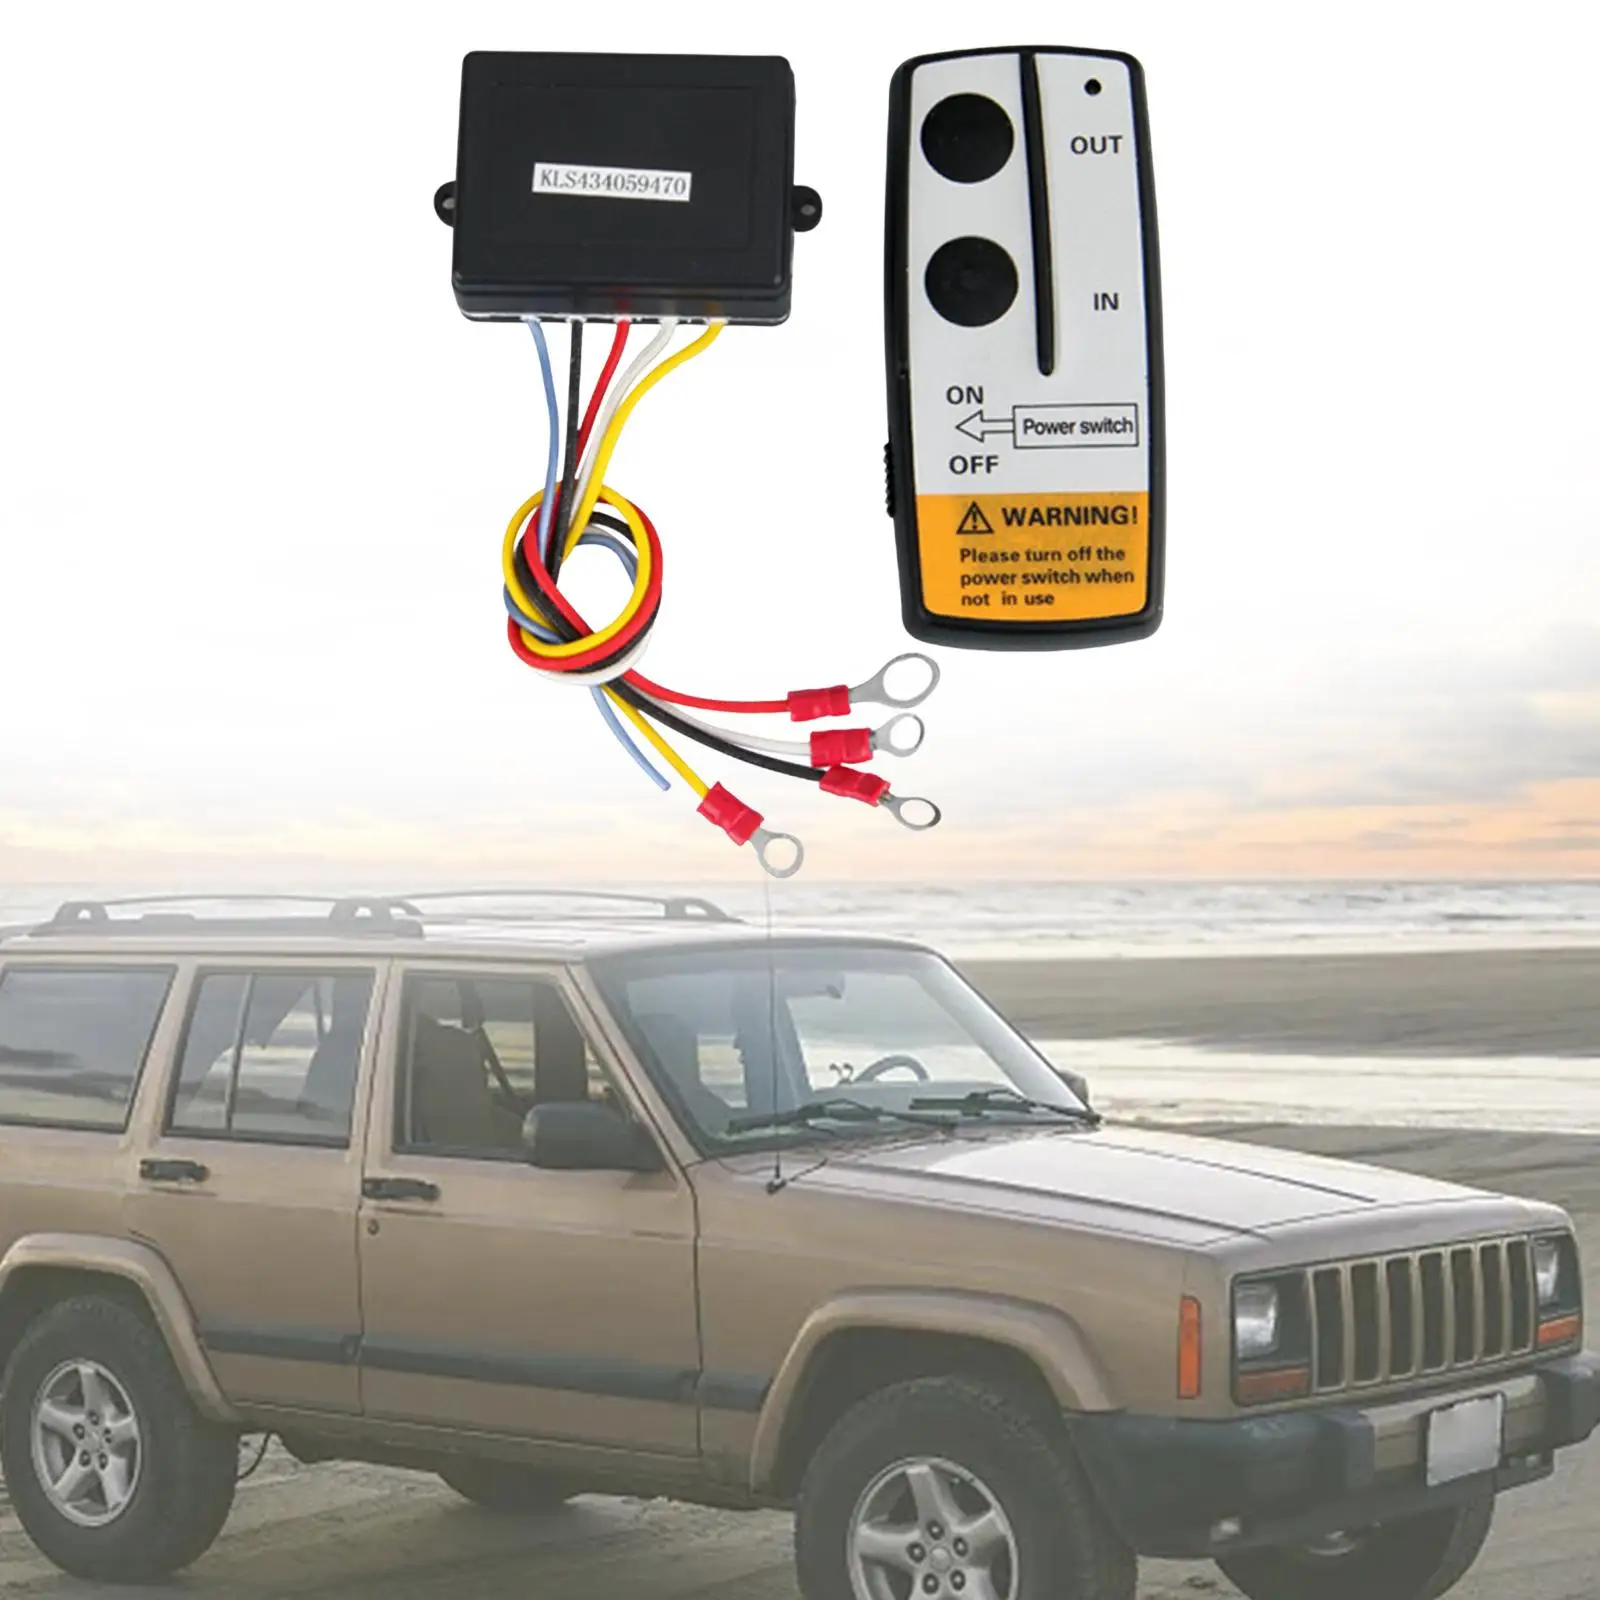 Winch Controller Universal High Performance Spare Parts Winch Electric Remote Control Replacement for SUV Car UTV Truck ATV